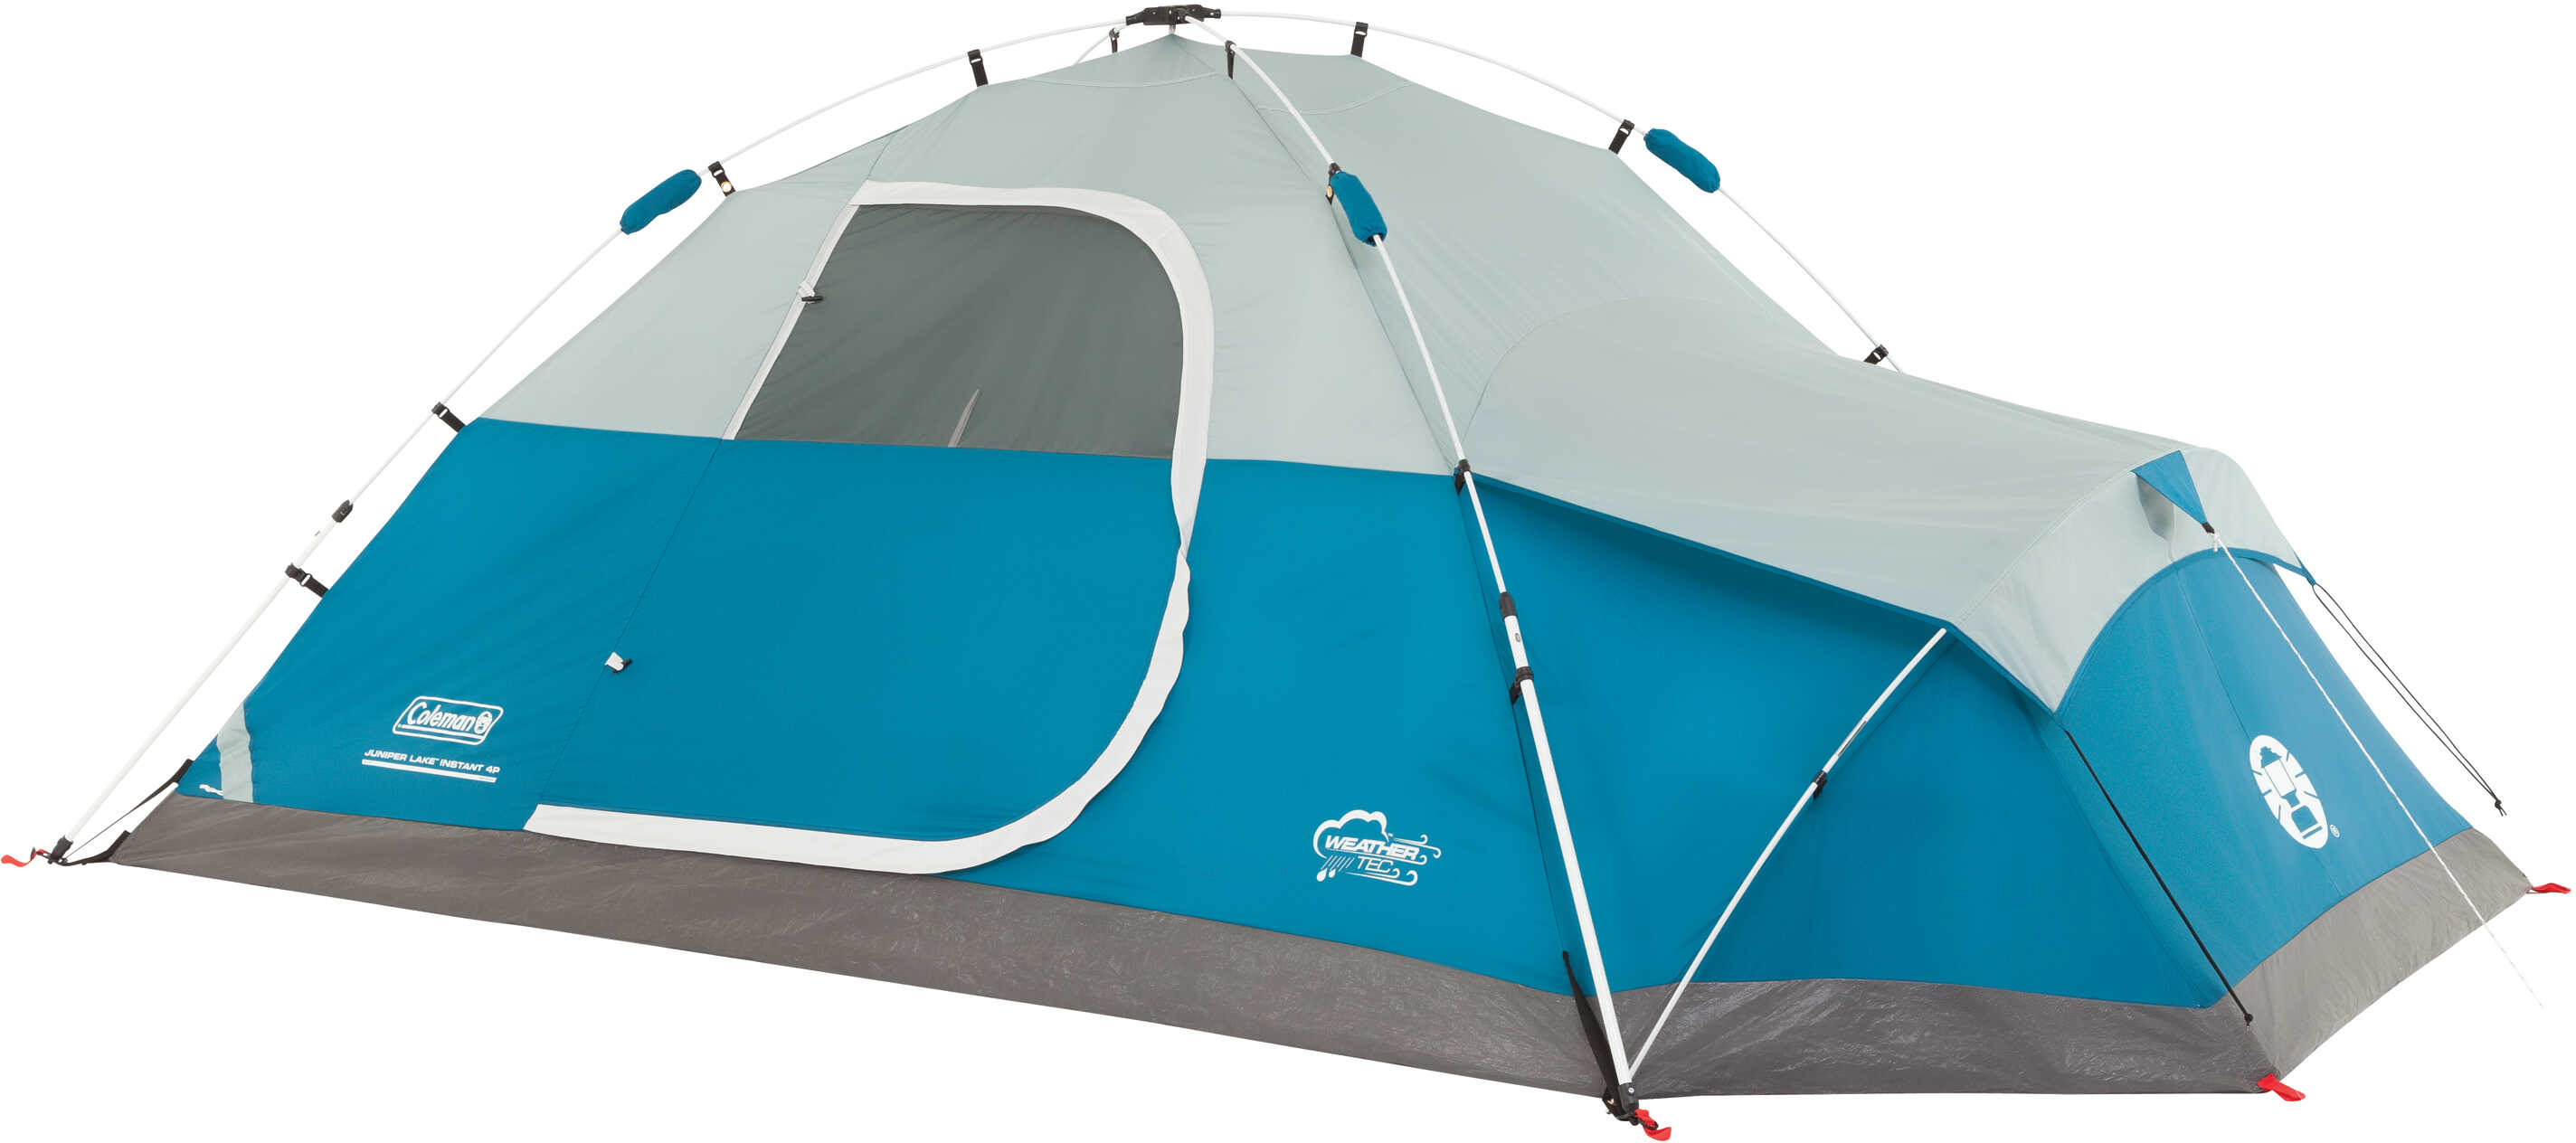 Coleman Juniper Lake 4 Person Instant Dome Tent with Annex